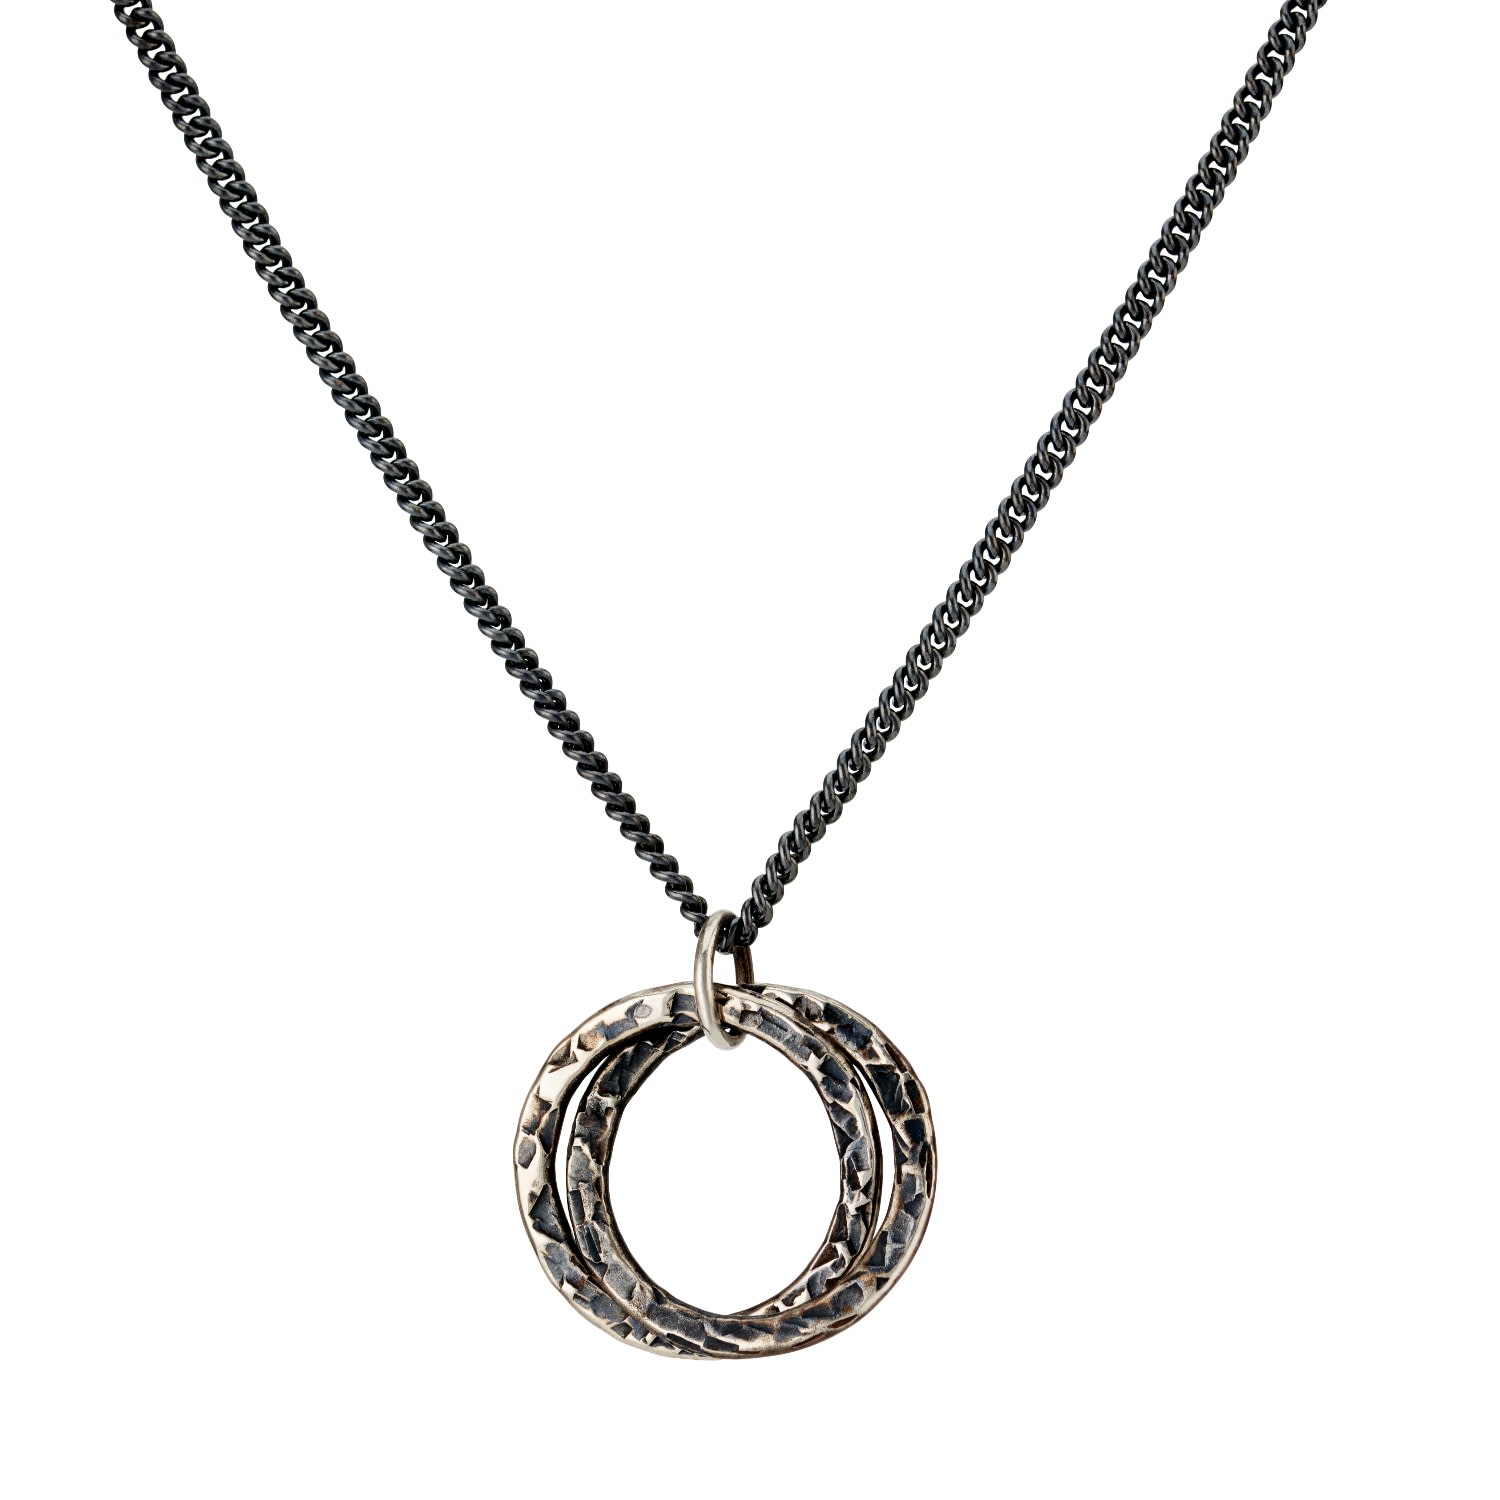 Men's Oxidised Sterling Silver Textured Interlinking Hoops Necklace Posh Totty Designs